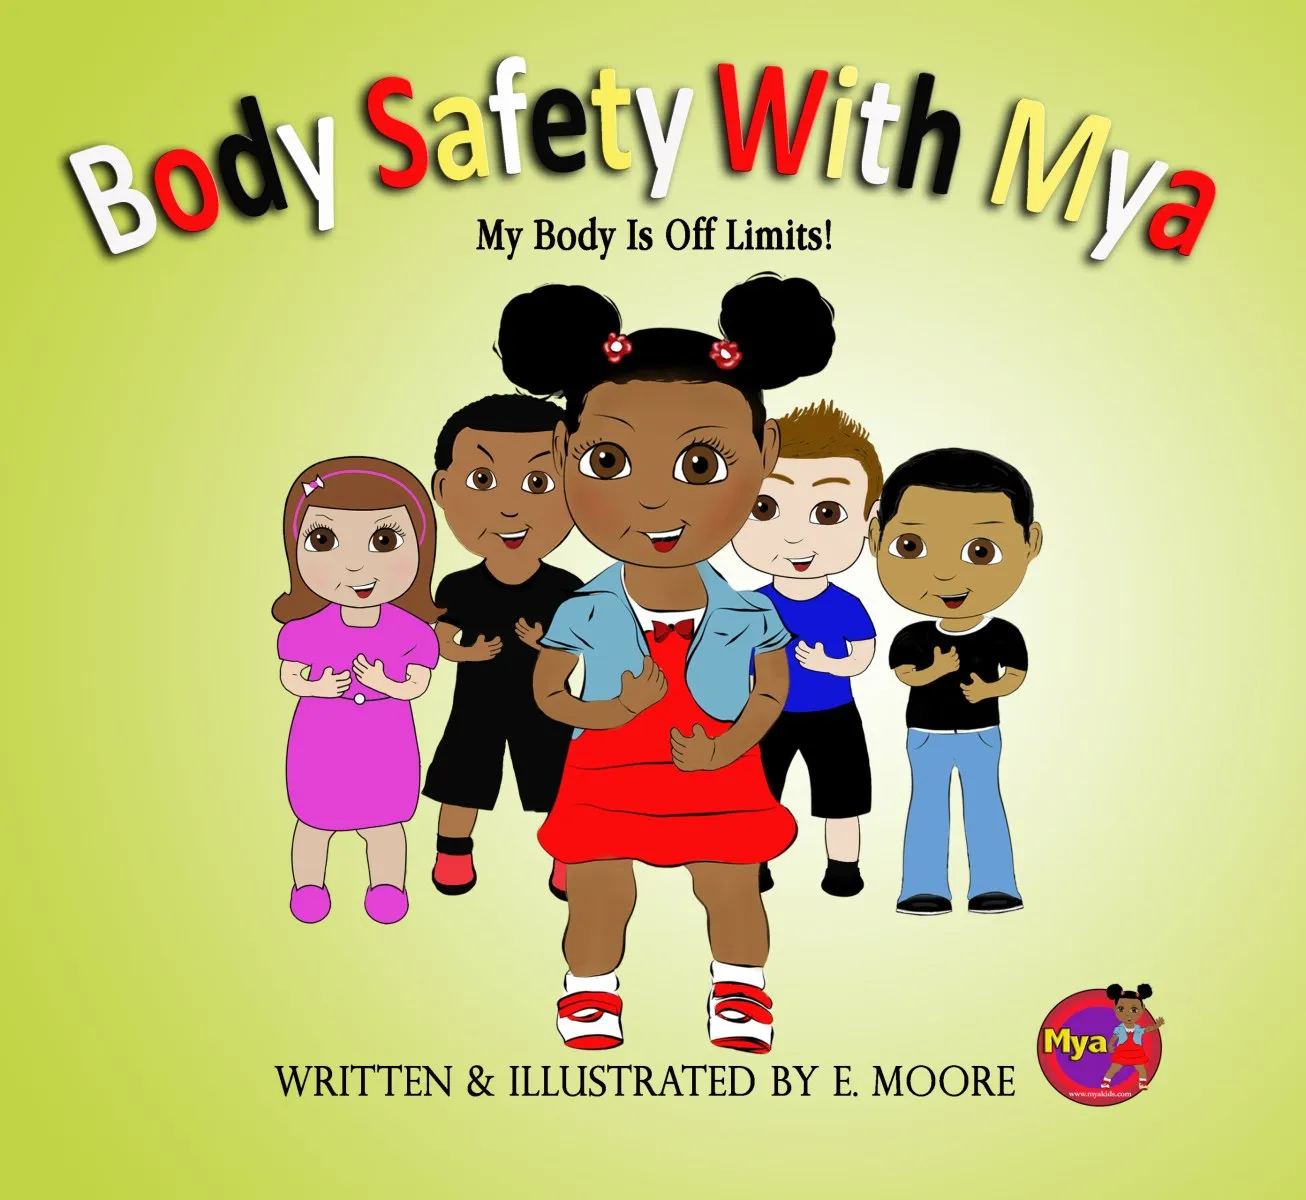 Body Safety With Mya: My Body Is Off Limits!